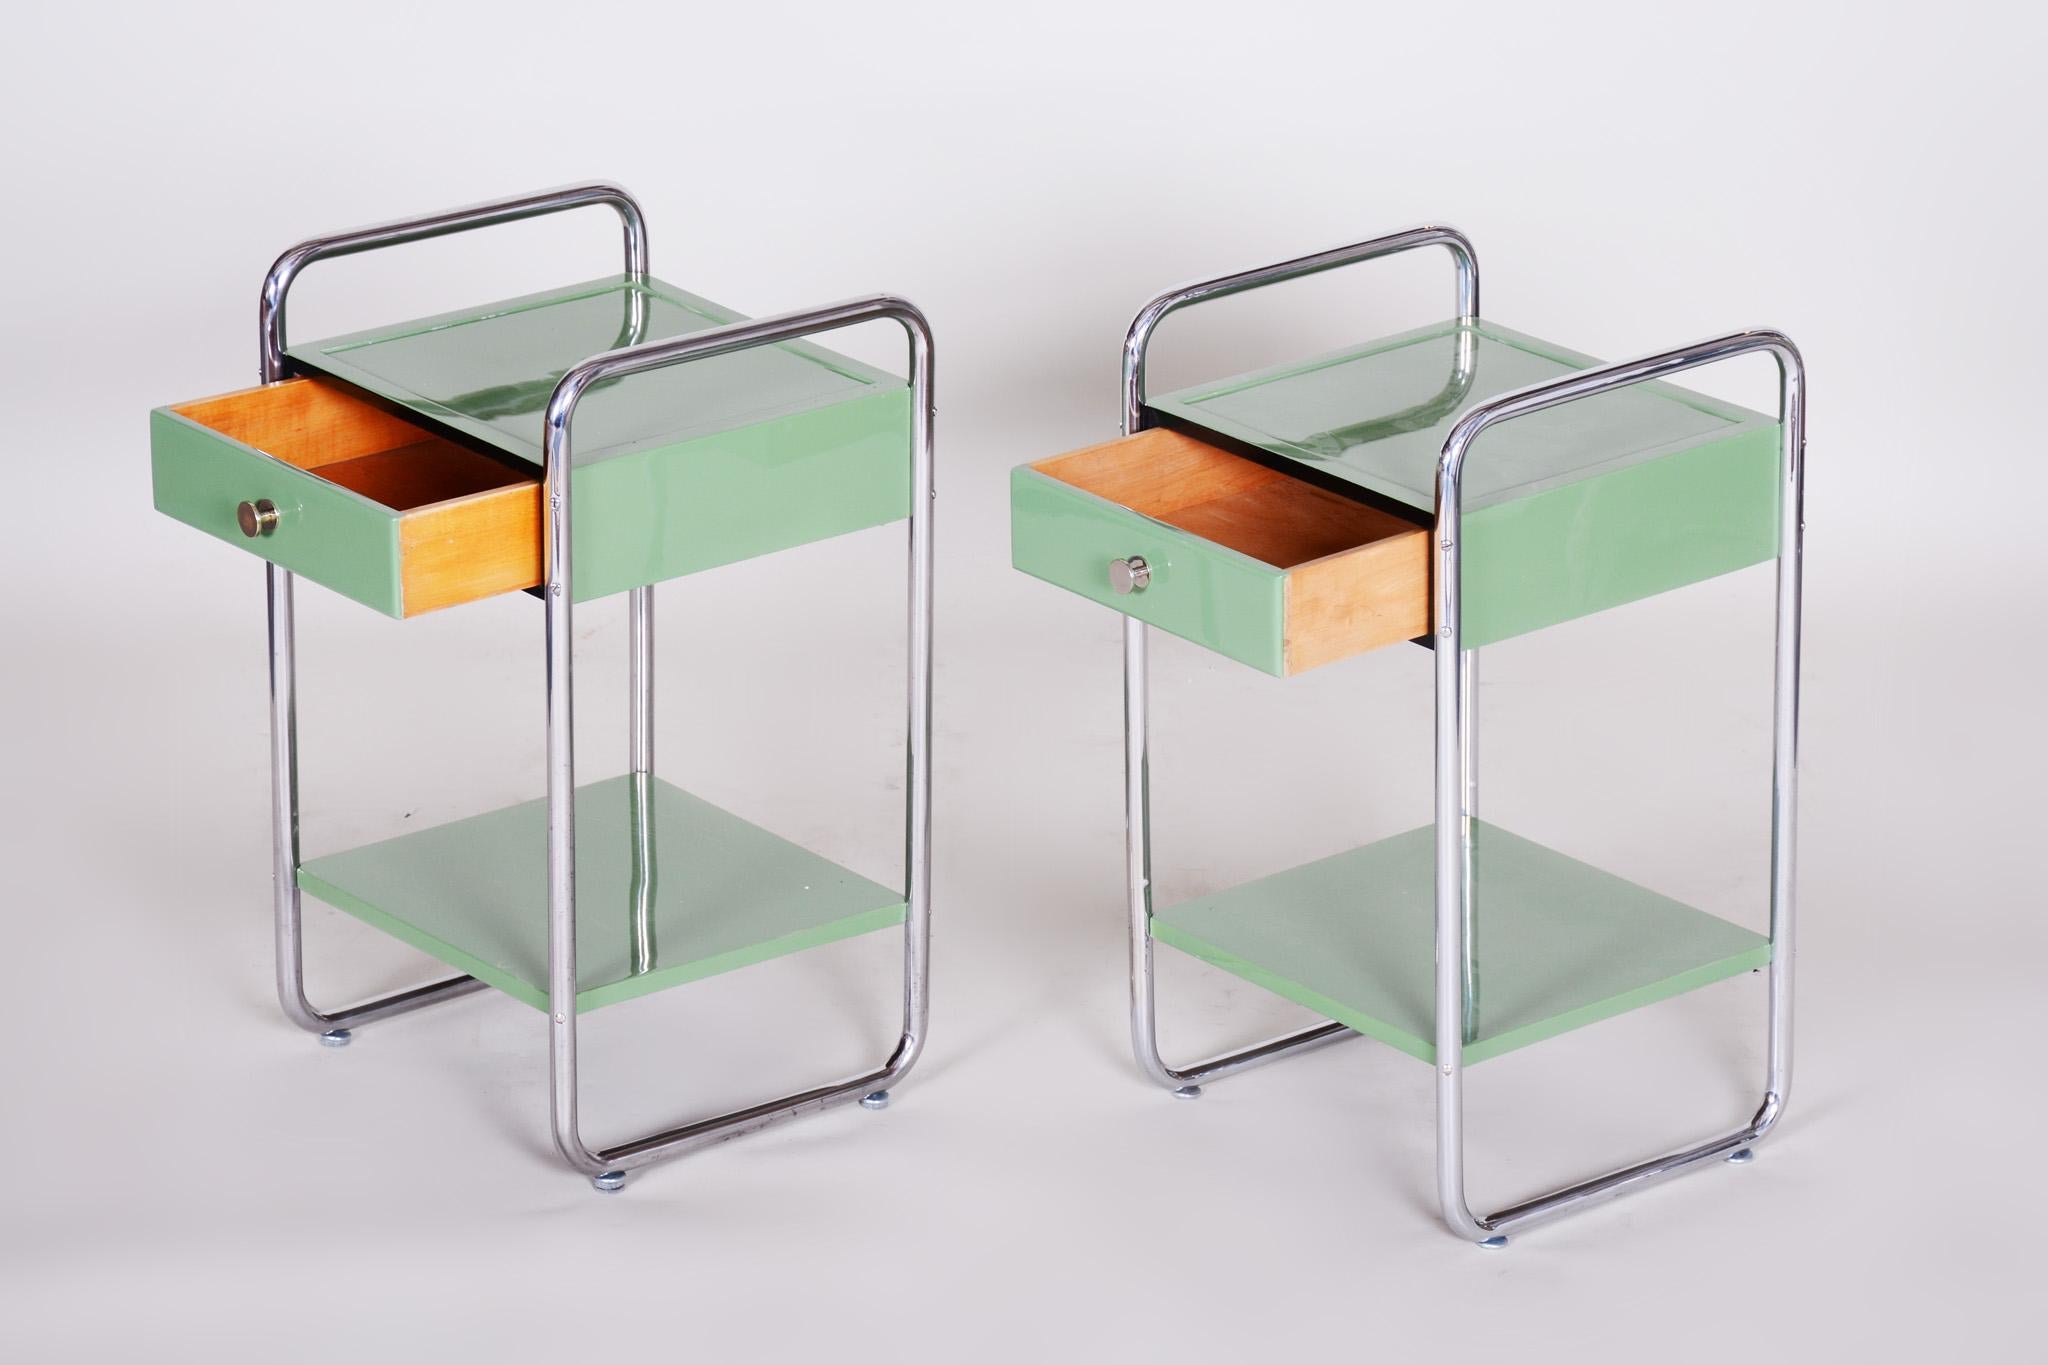 Restored Bauhaus Pair of Bed-Side Tables, Chrome-Plated Steel, Czech, 1930s For Sale 13